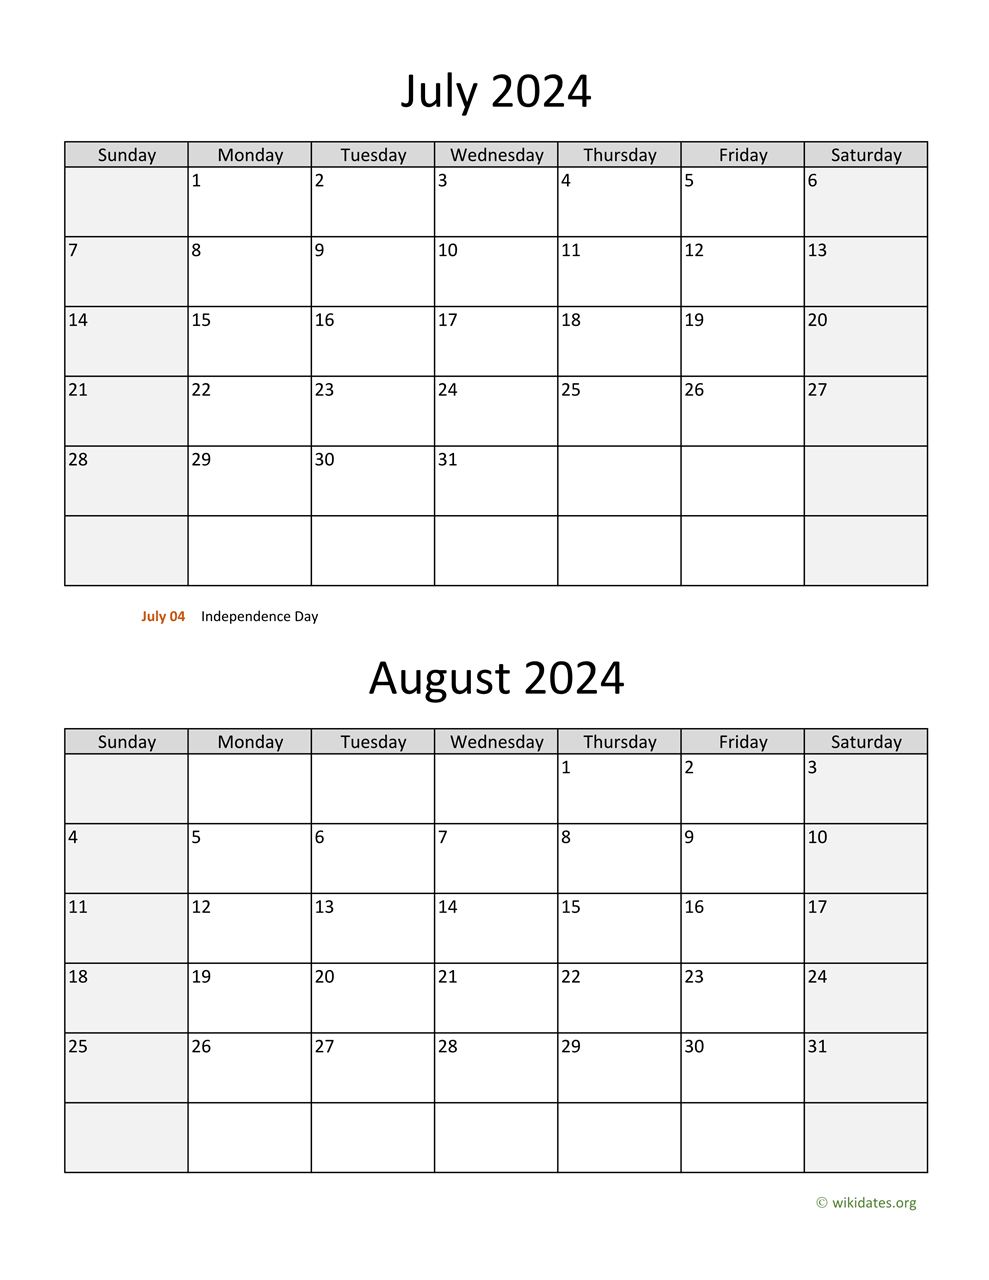 July And August 2024 Calendar | Wikidates for June-August 2024 Calendar Printable